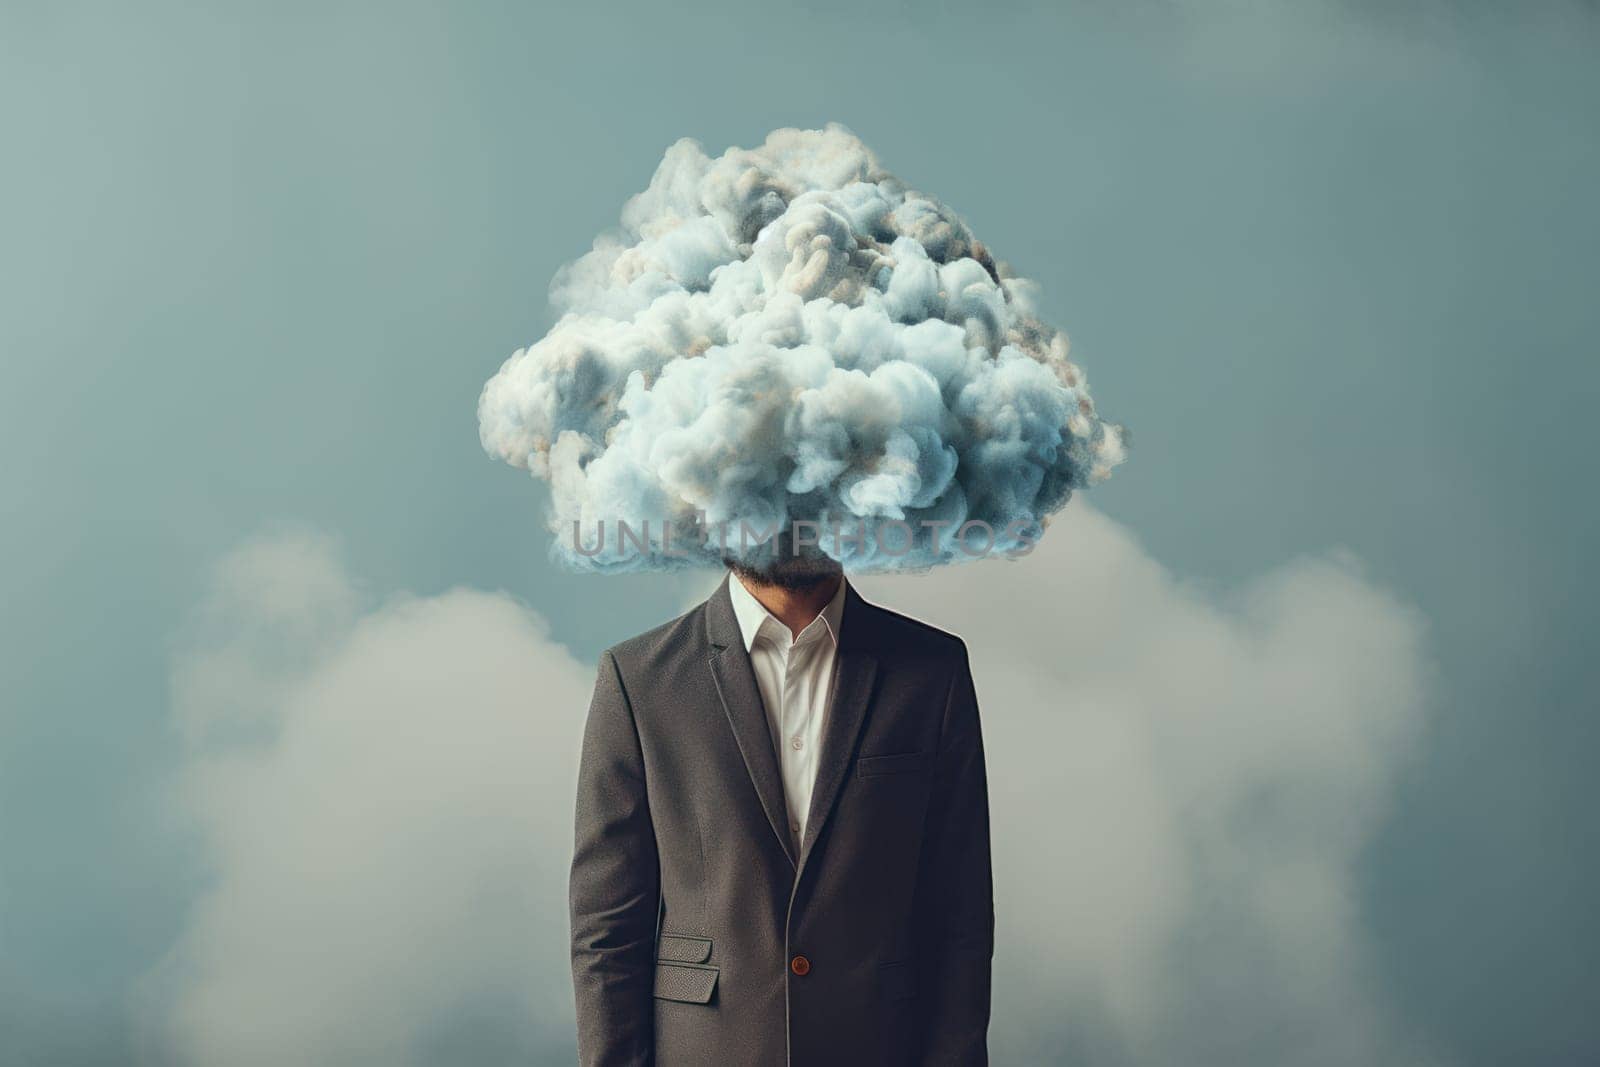 Creative image depicting a man in a suit with a cloud for a head, symbolizing imagination